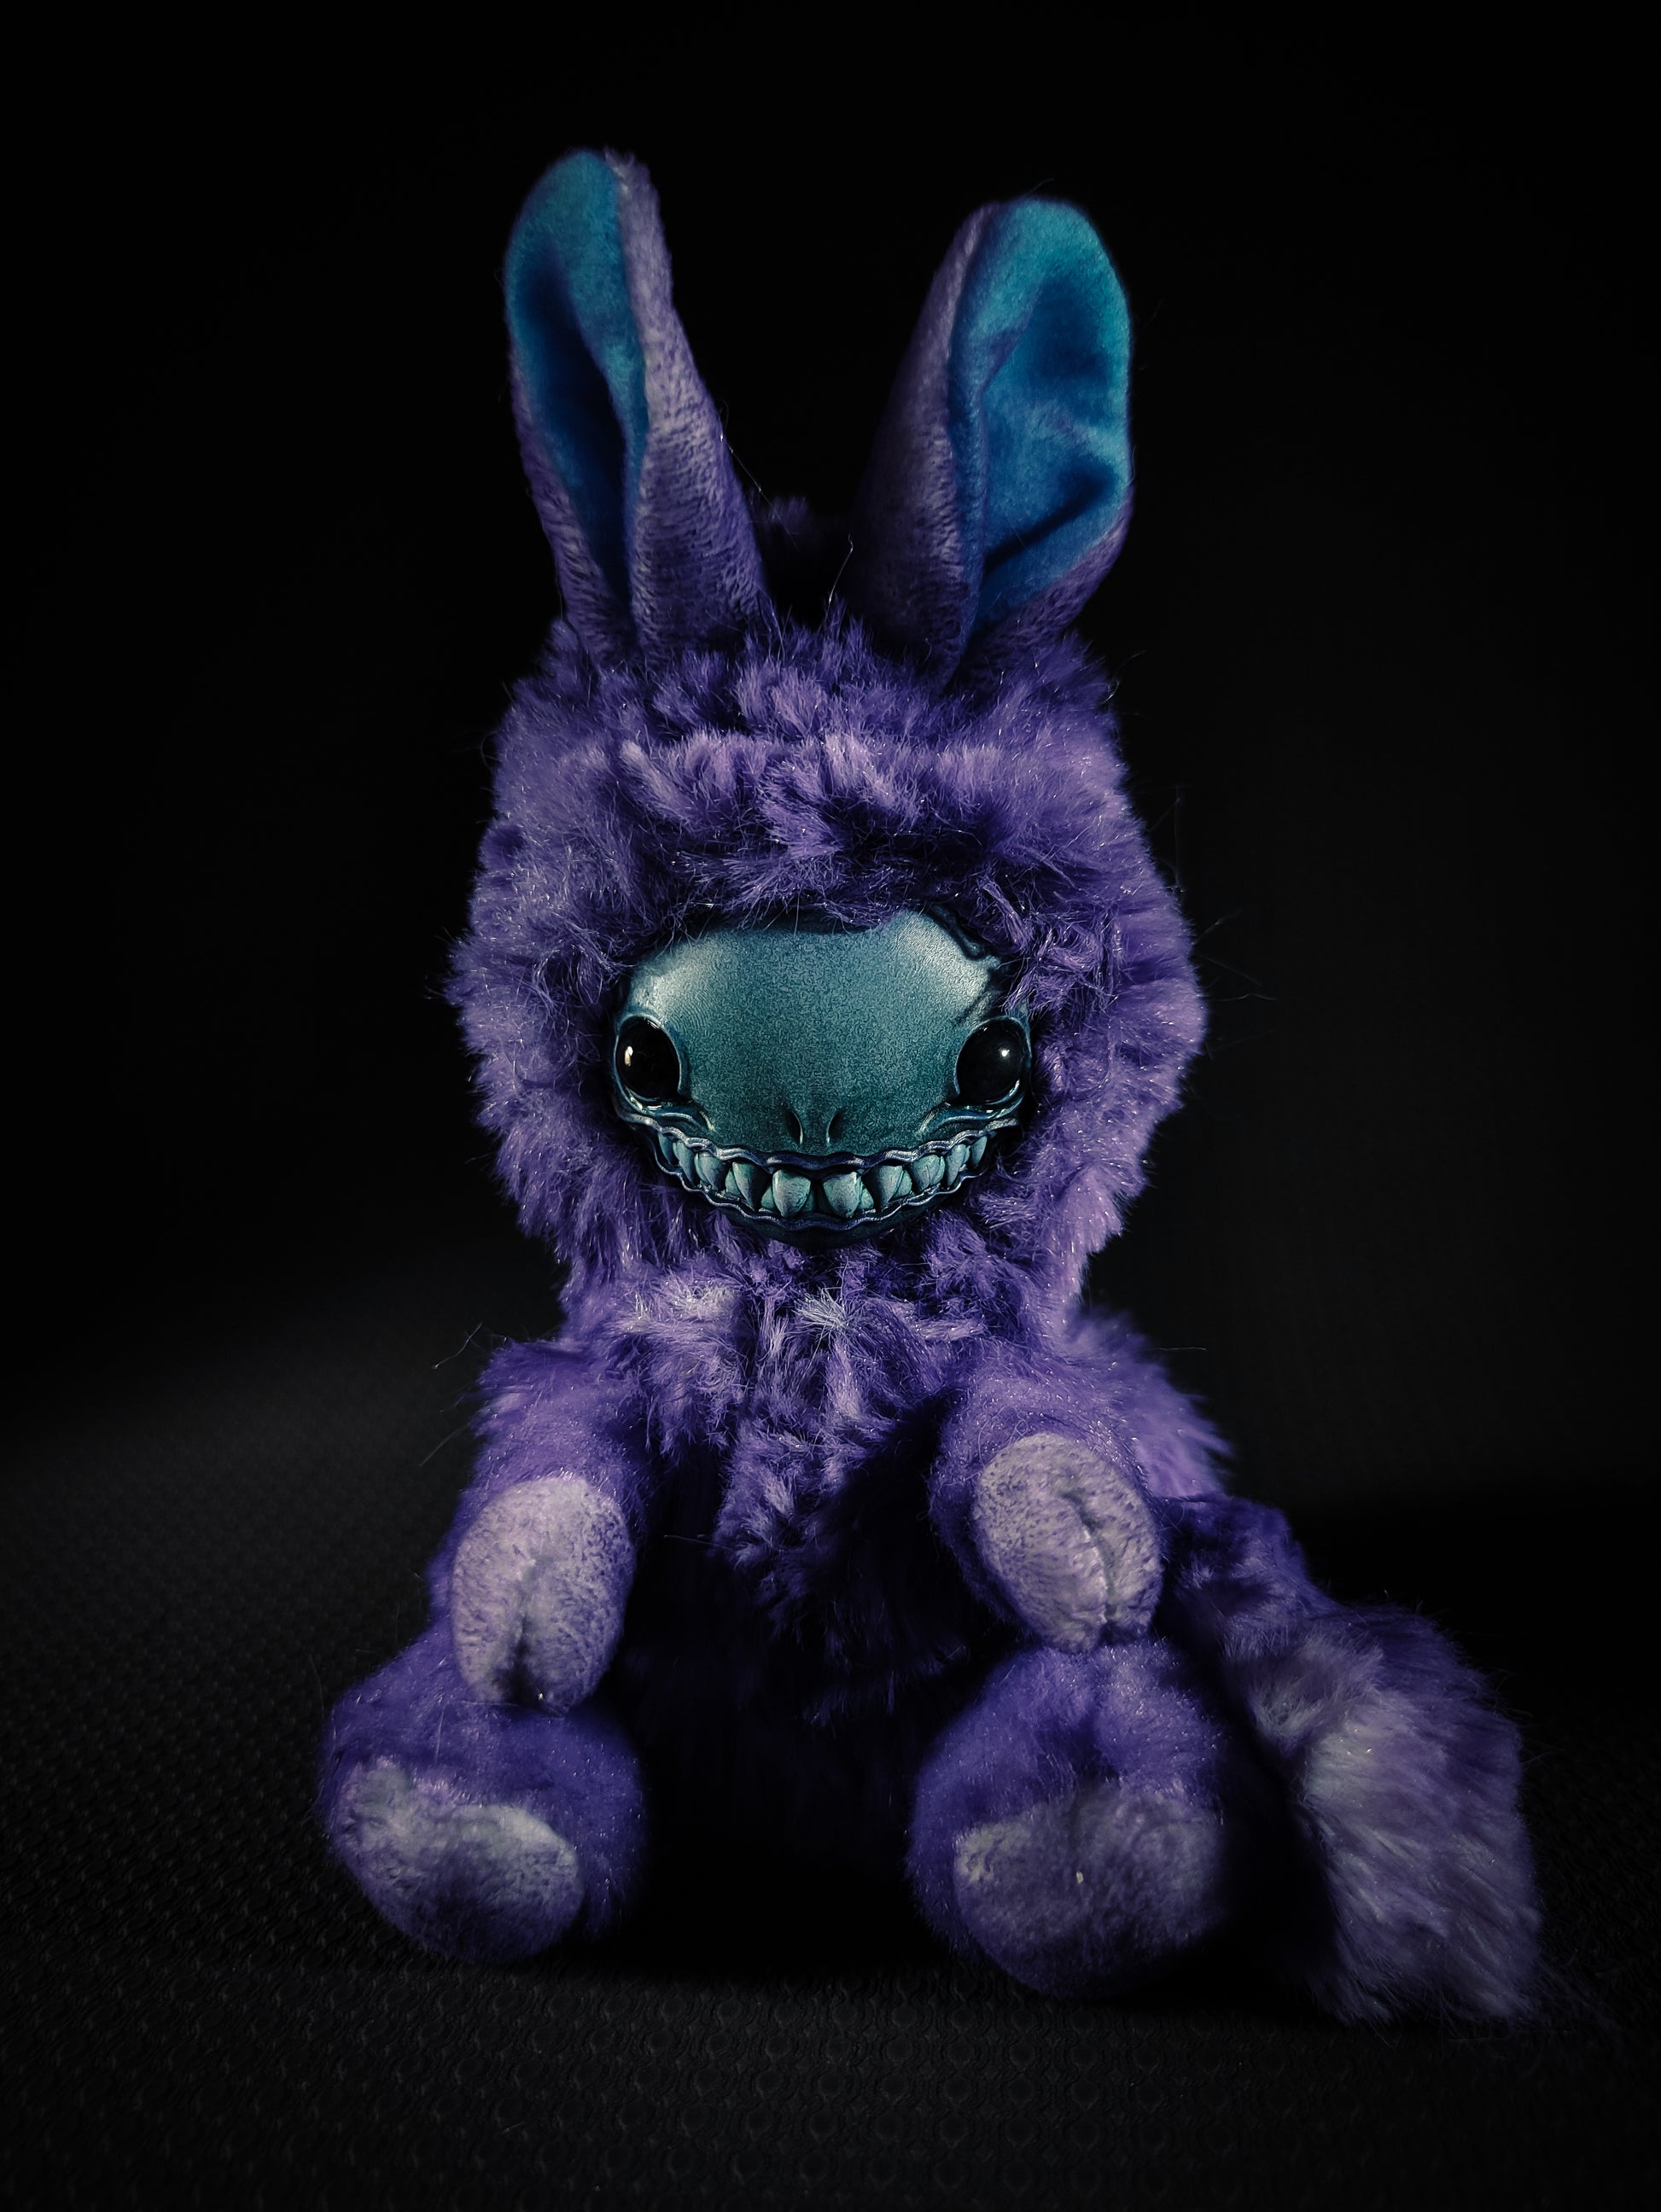 FRIEND Gloom Flavour - Cryptid Art Doll Plush Toy